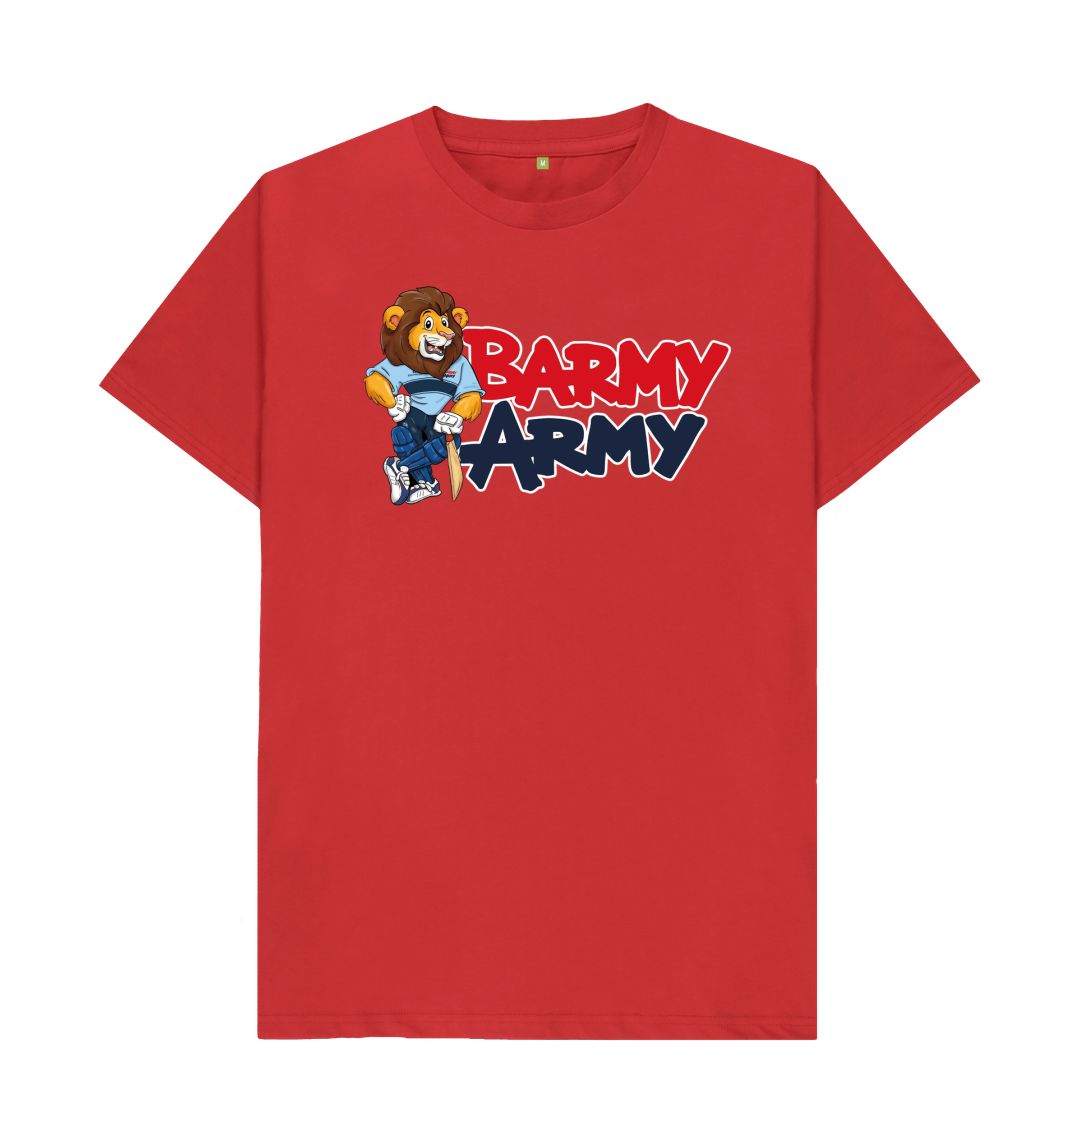 Red Barmy Army Mascot Tee -Men's